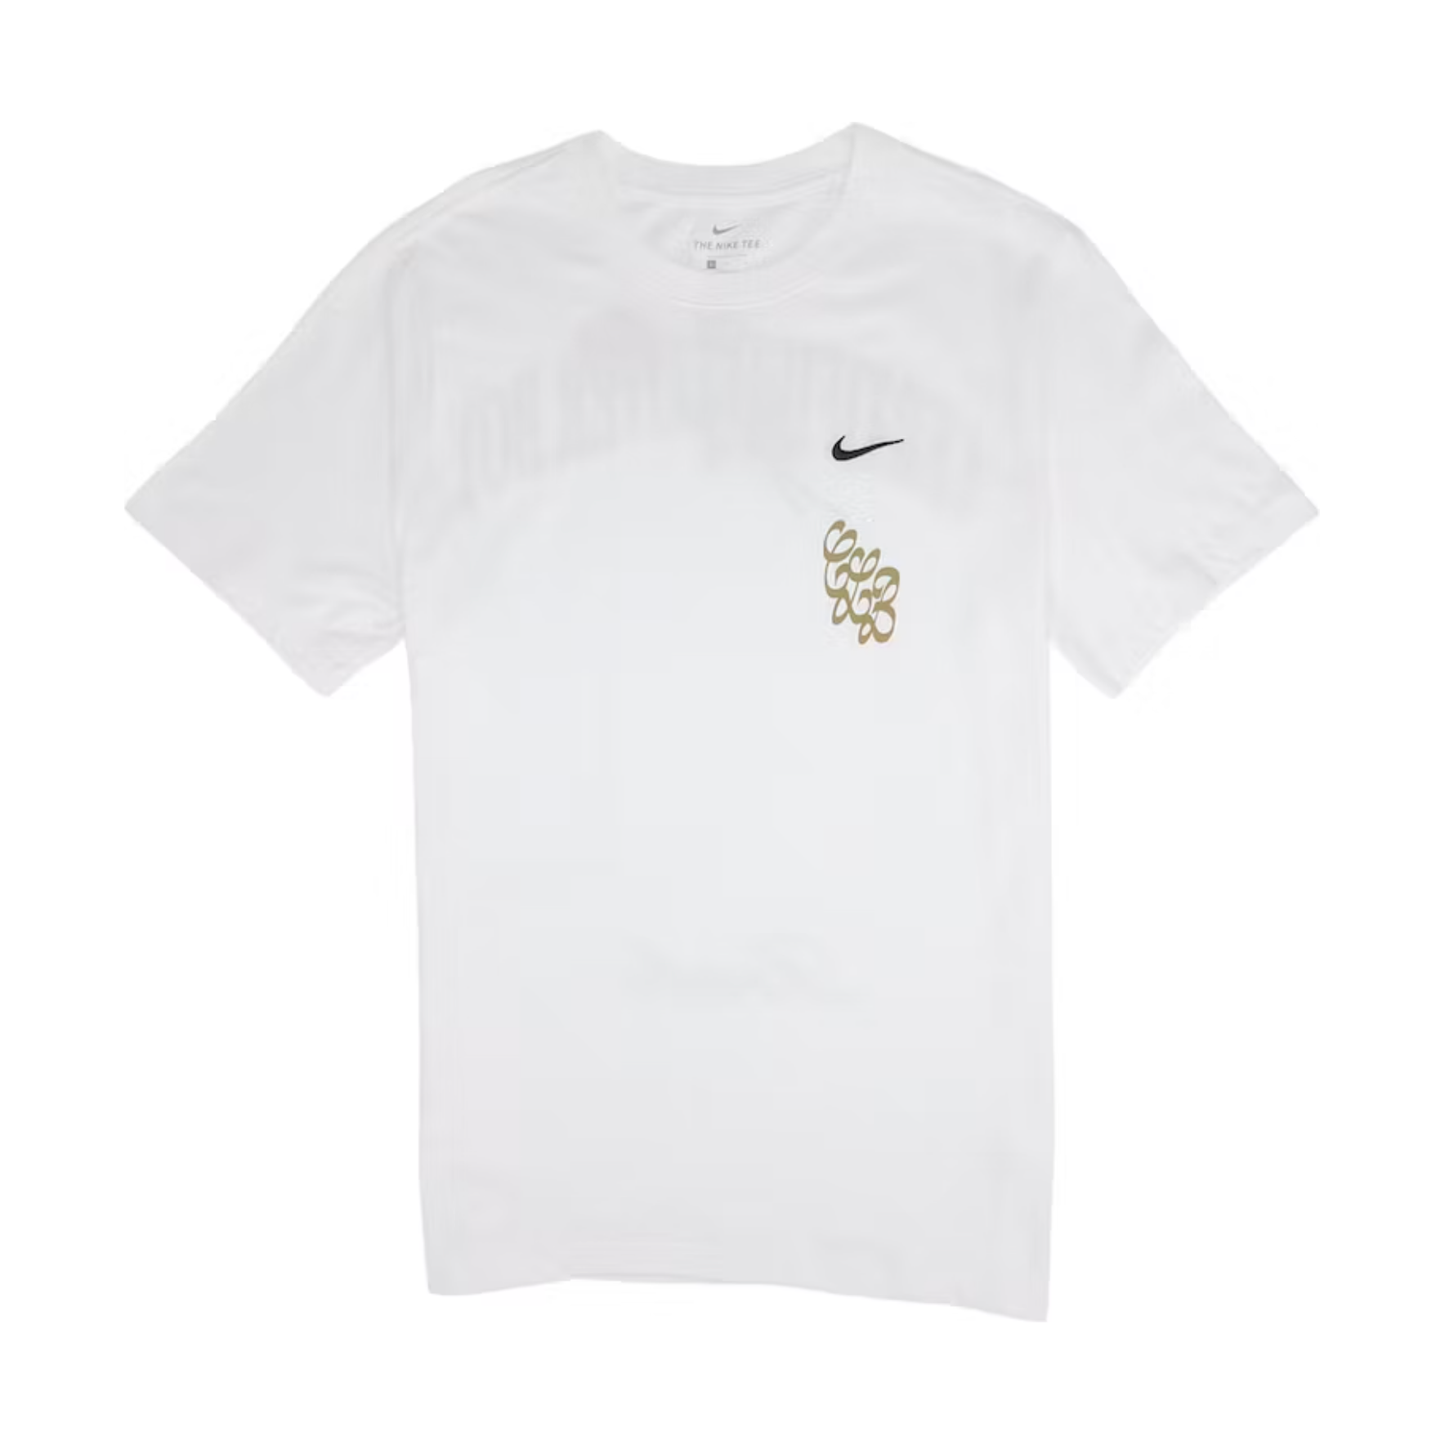 Nike x Drake Certified Lover Boy Rose T-Shirt White by Nike from £65.99